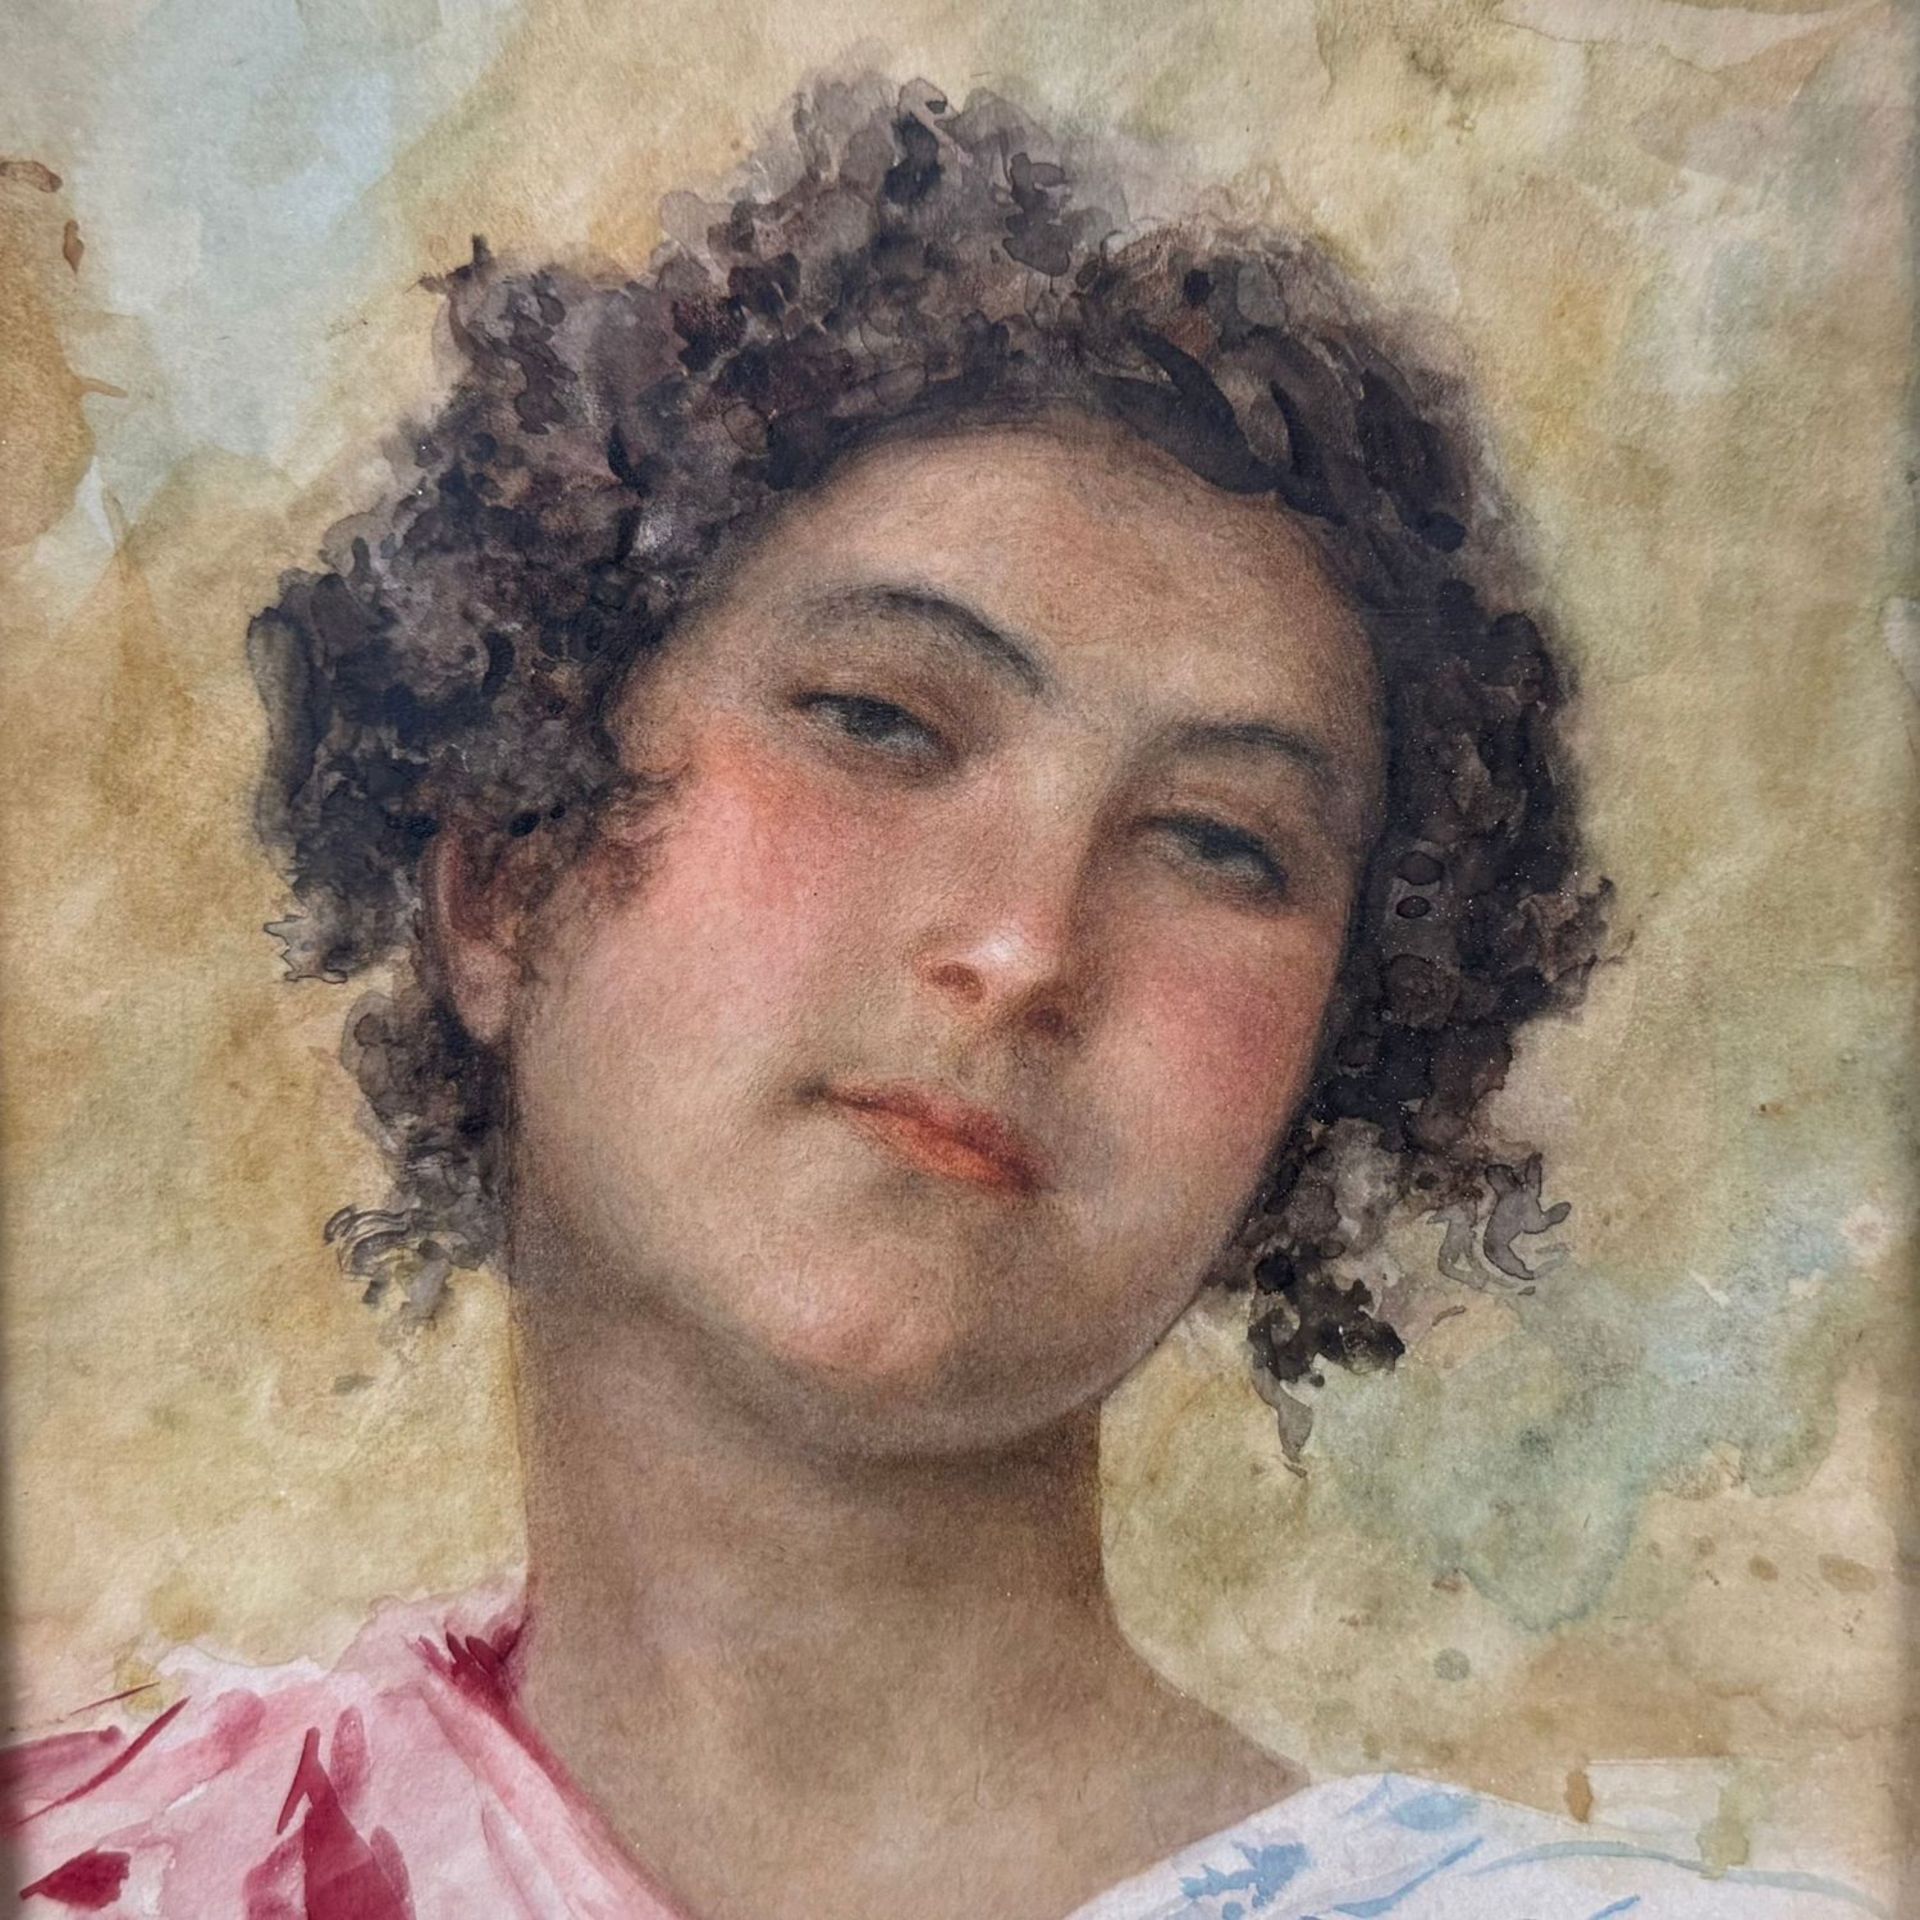 Portrait of a young woman - V. Migliaro (1858 - 1938) - Image 3 of 7